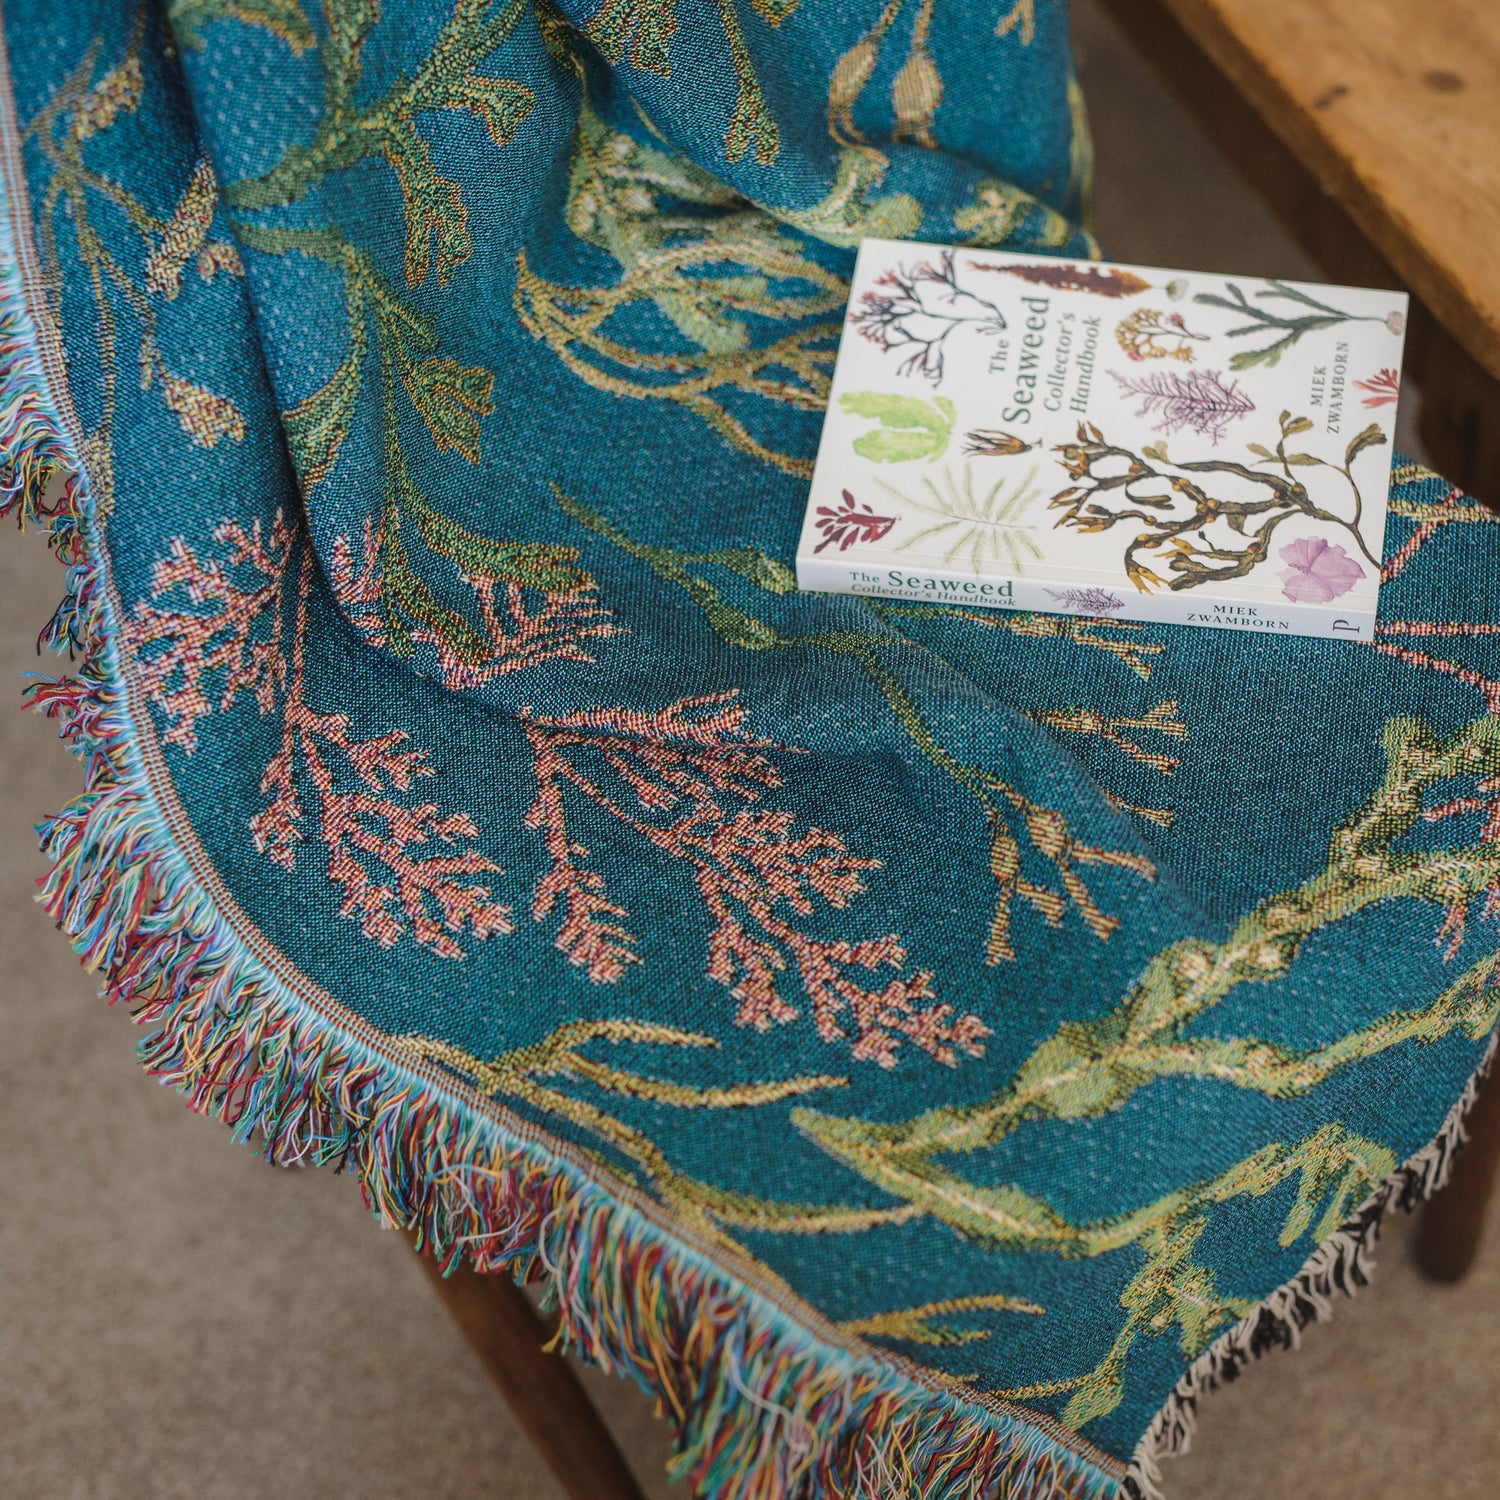 Woven blanket with fringe on chair  with delicate seaweed design in blue, green and pink